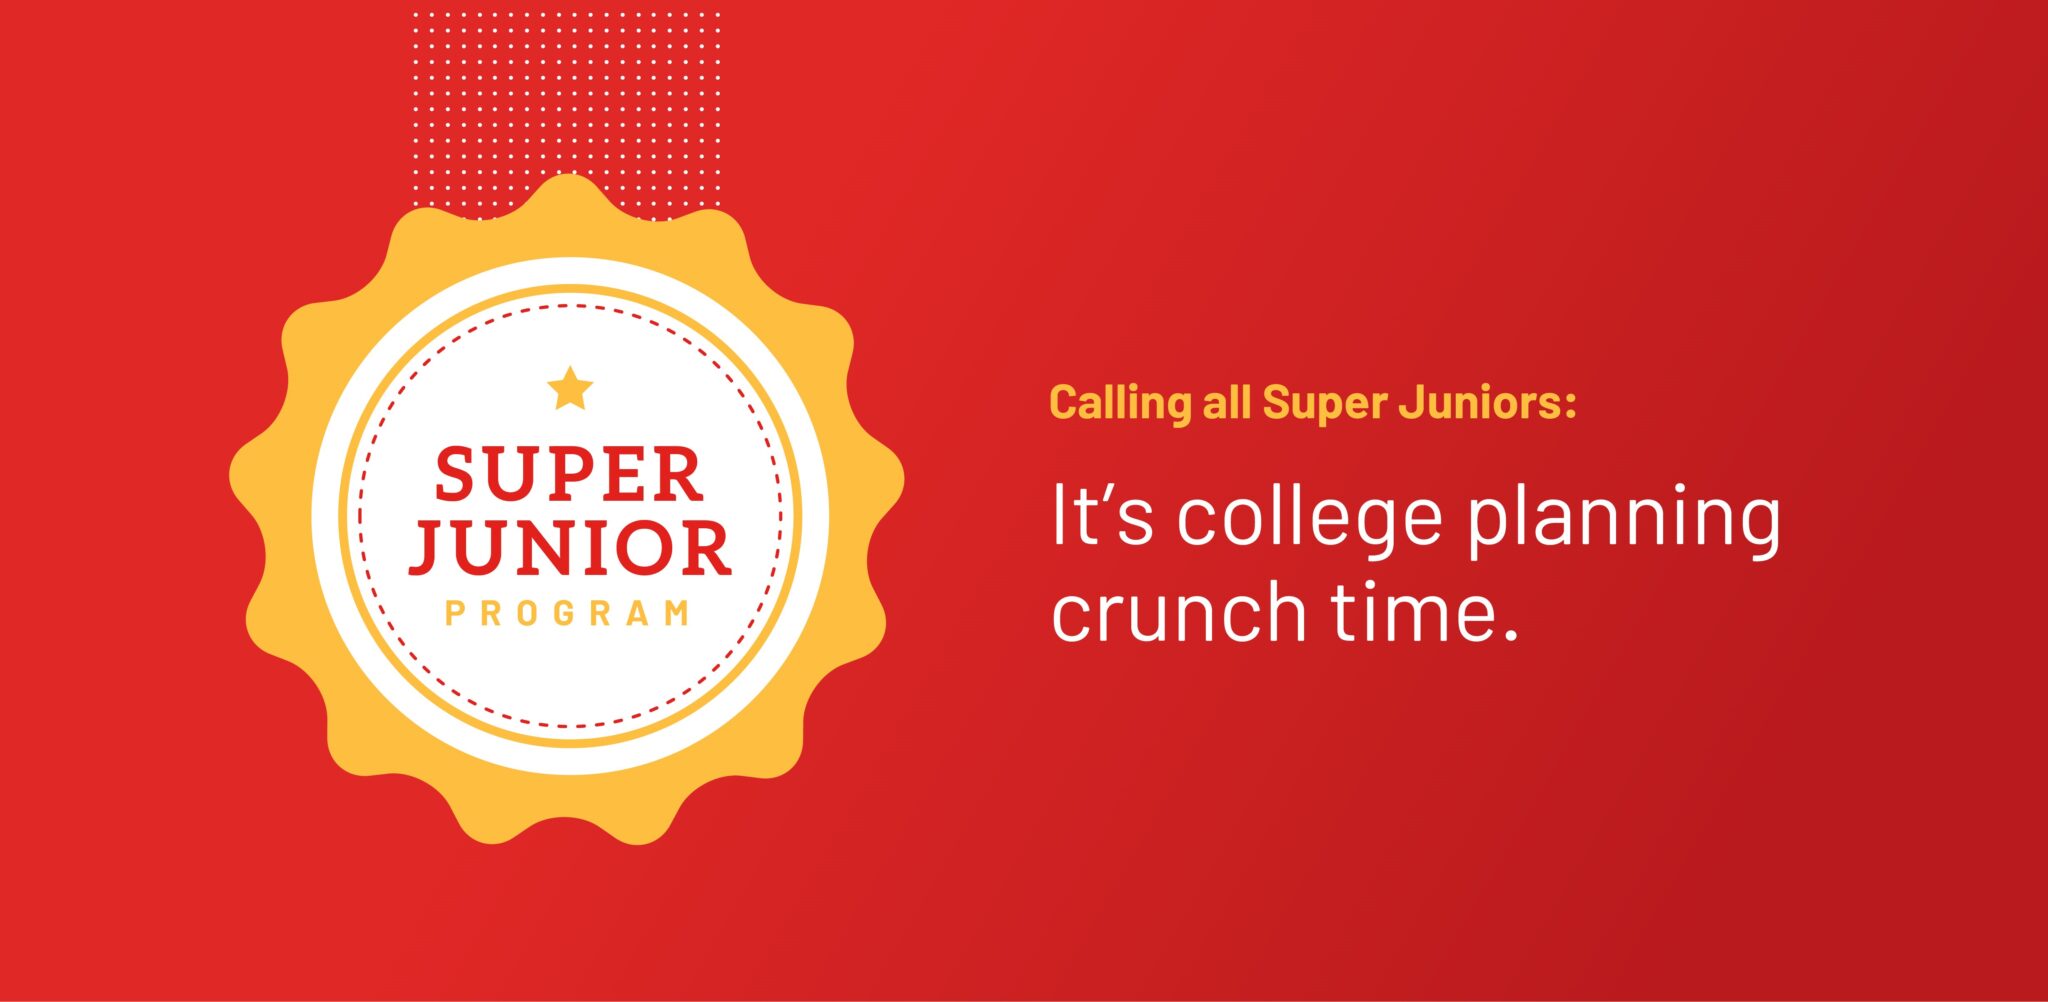 Calling All Super Juniors: It’s College Planning Crunch Time